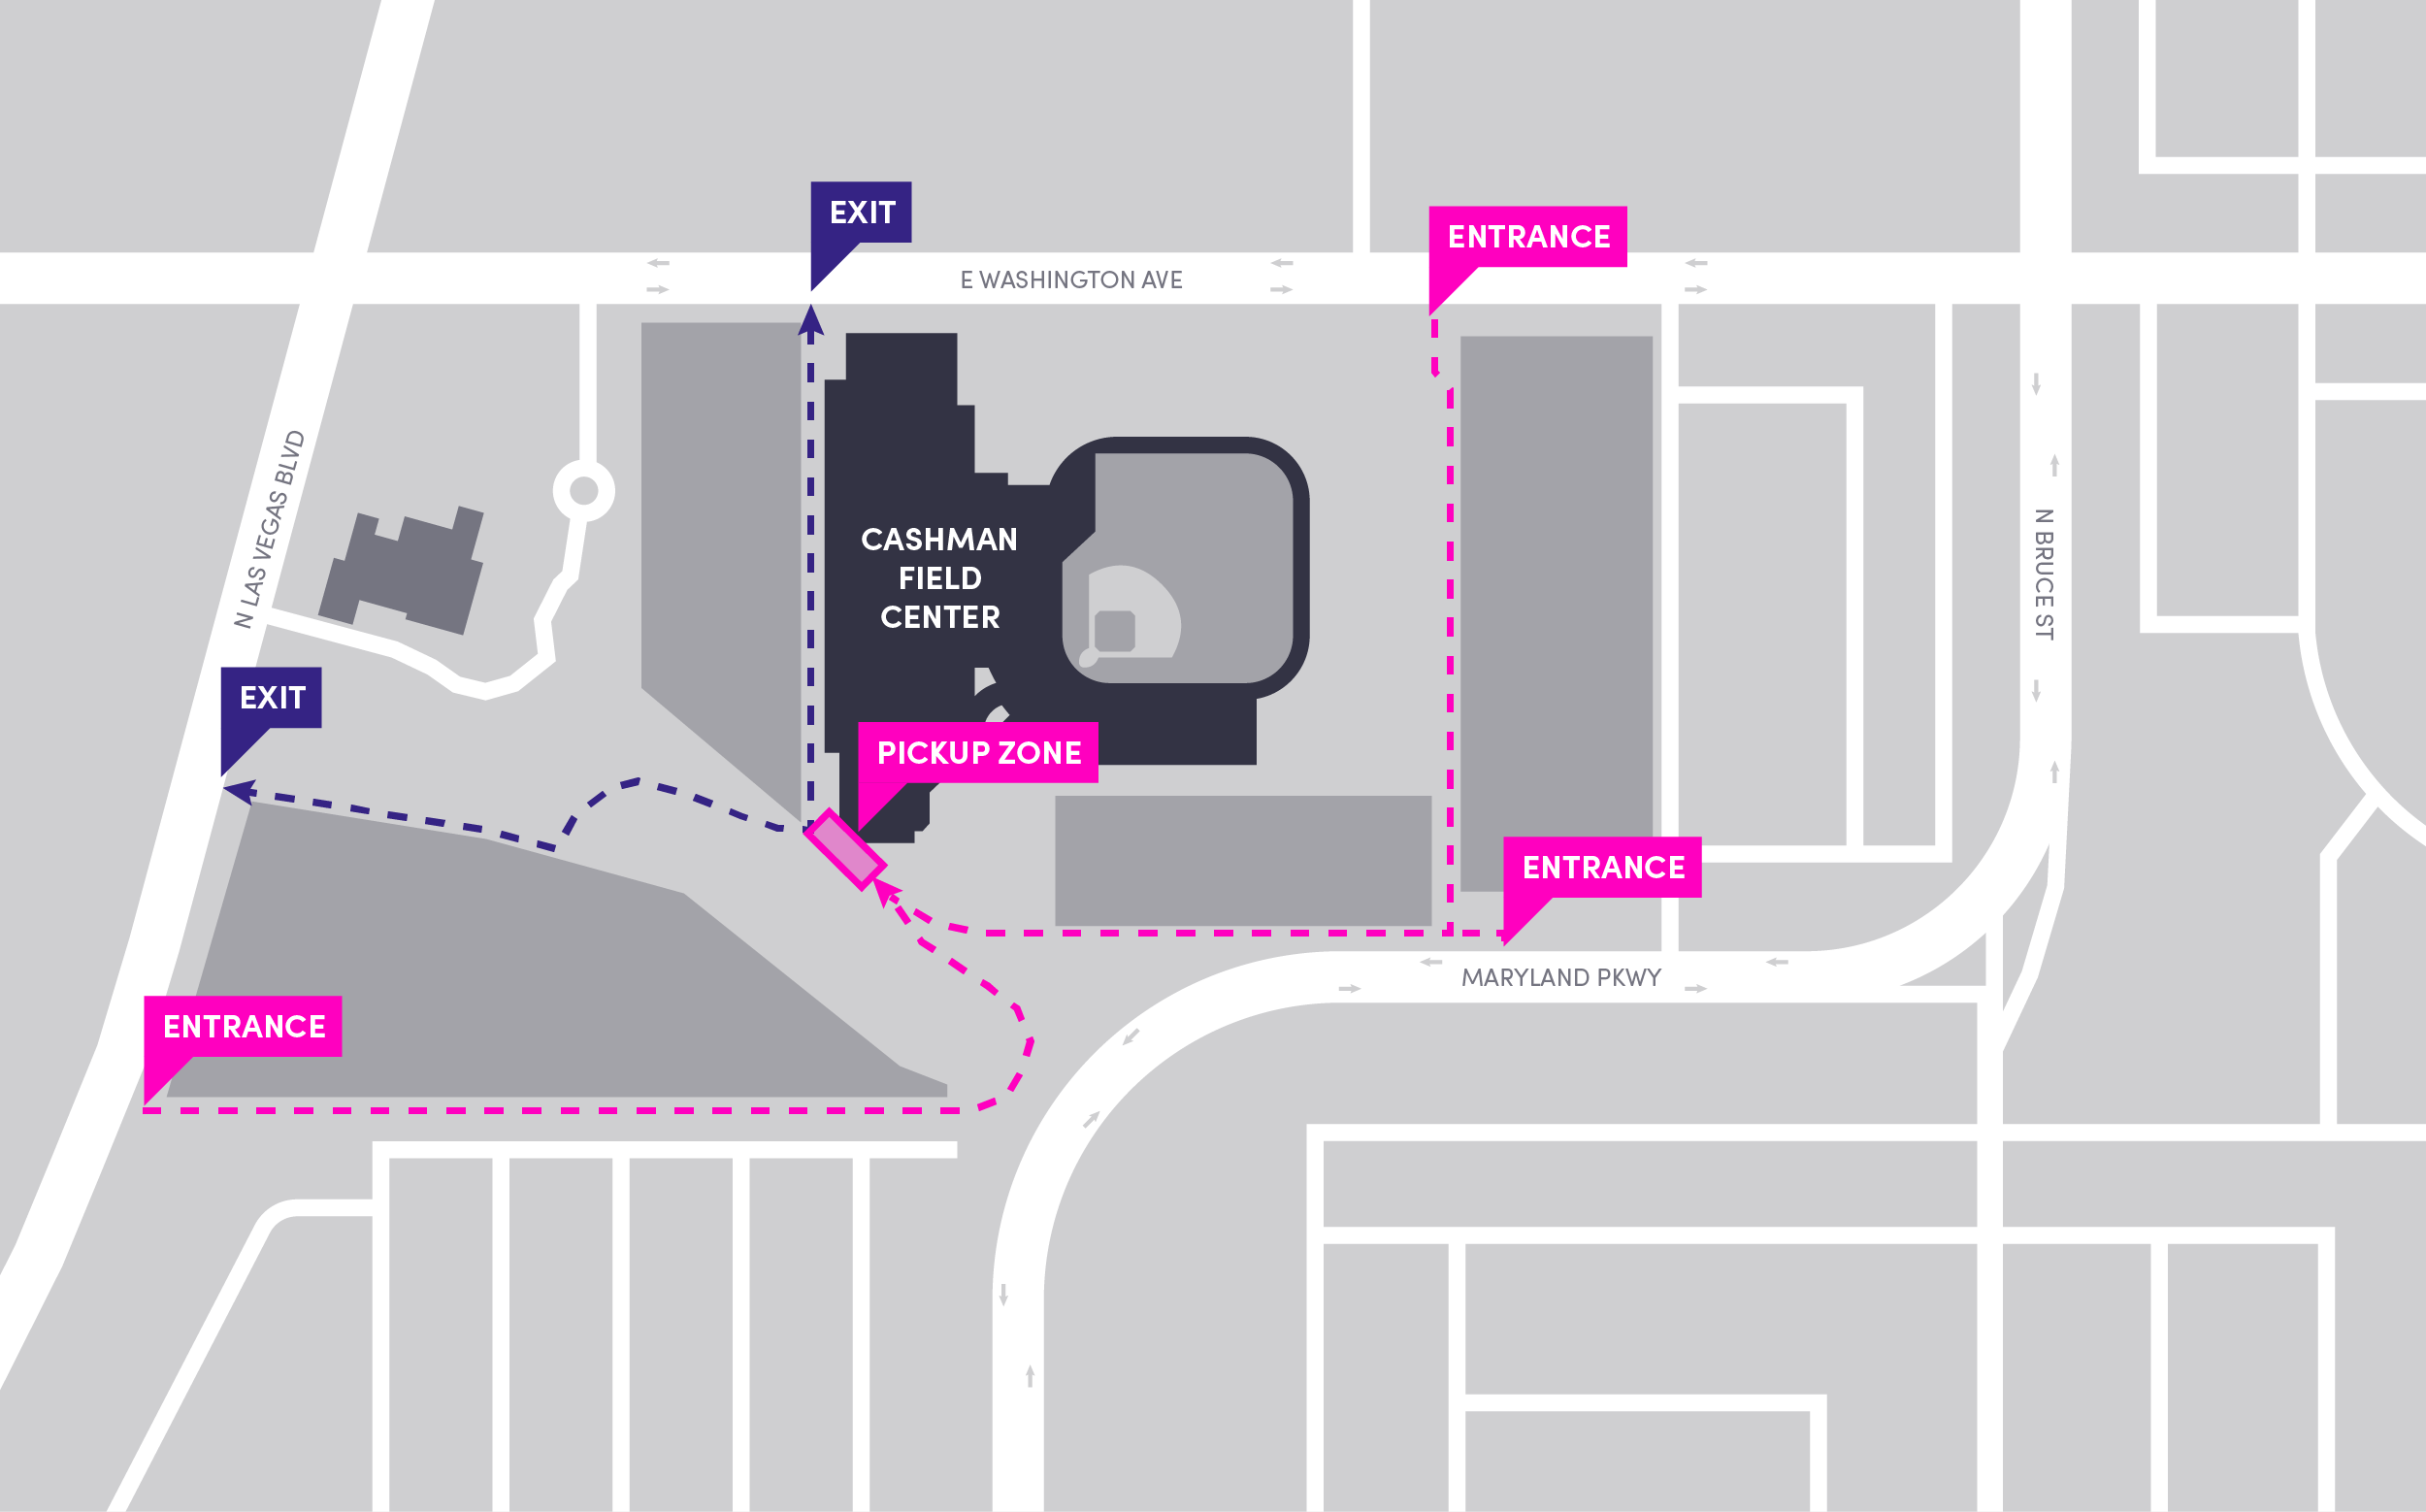 This image shows a map of the Cashman Field Center, including pickup and dropoff areas.